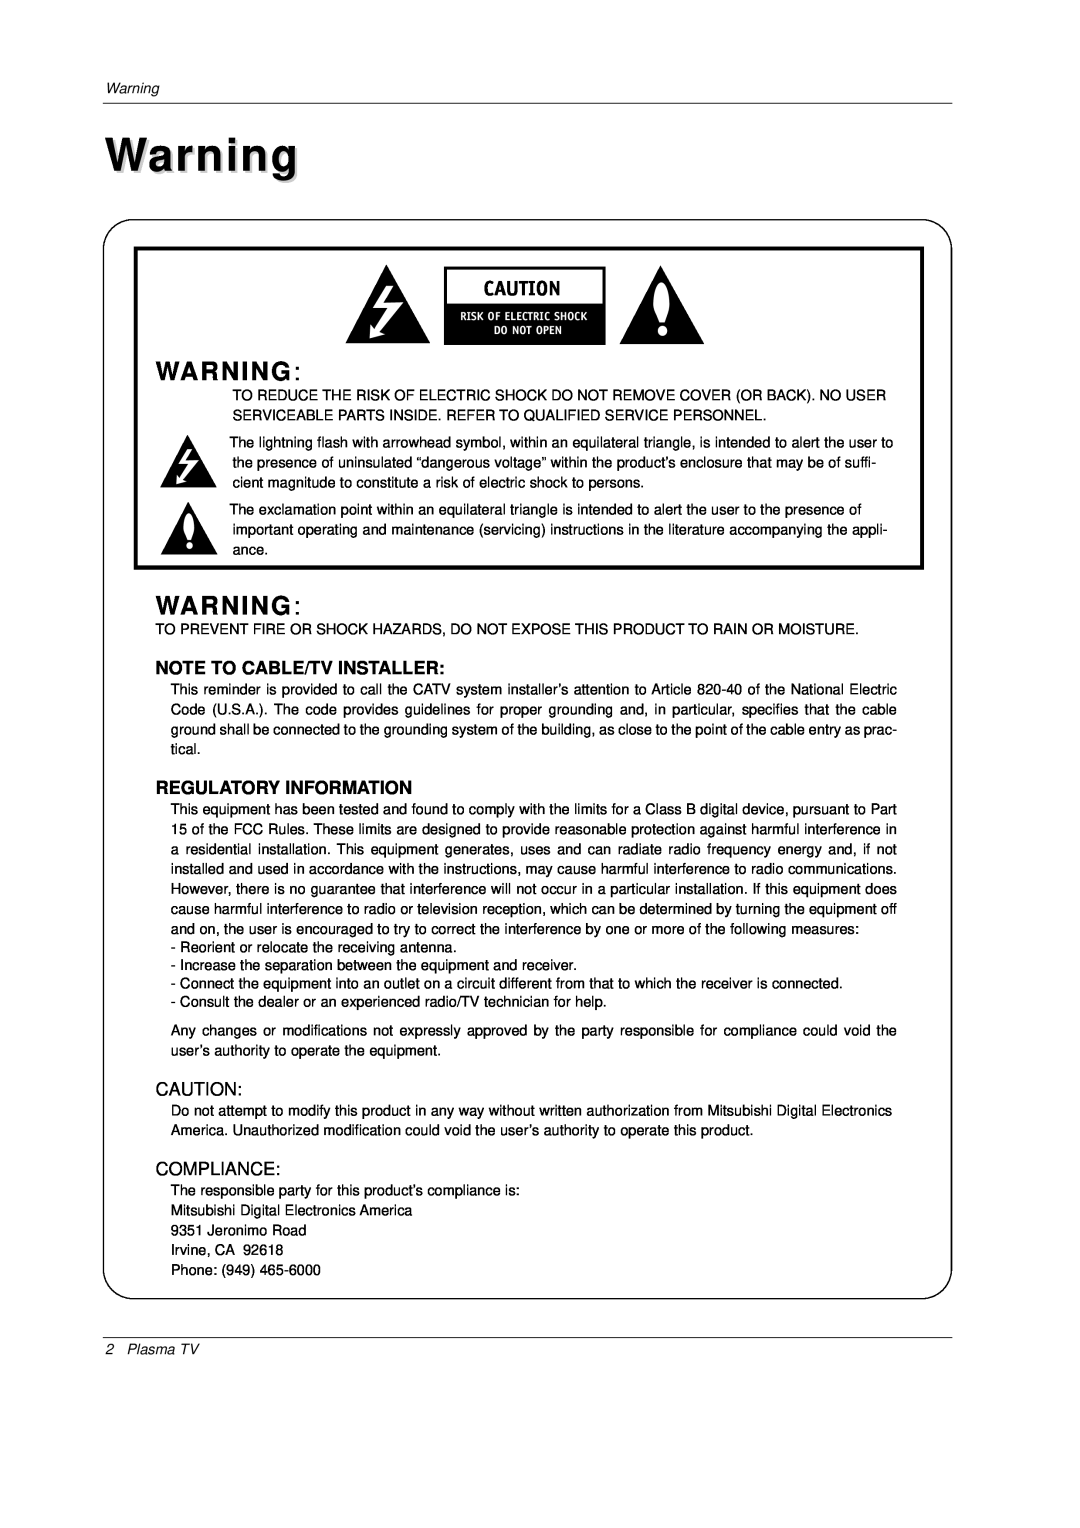 Mitsubishi Electronics PD-4225S manual Note To Cable/Tv Installer, Regulatory Information, Compliance, Plasma TV 